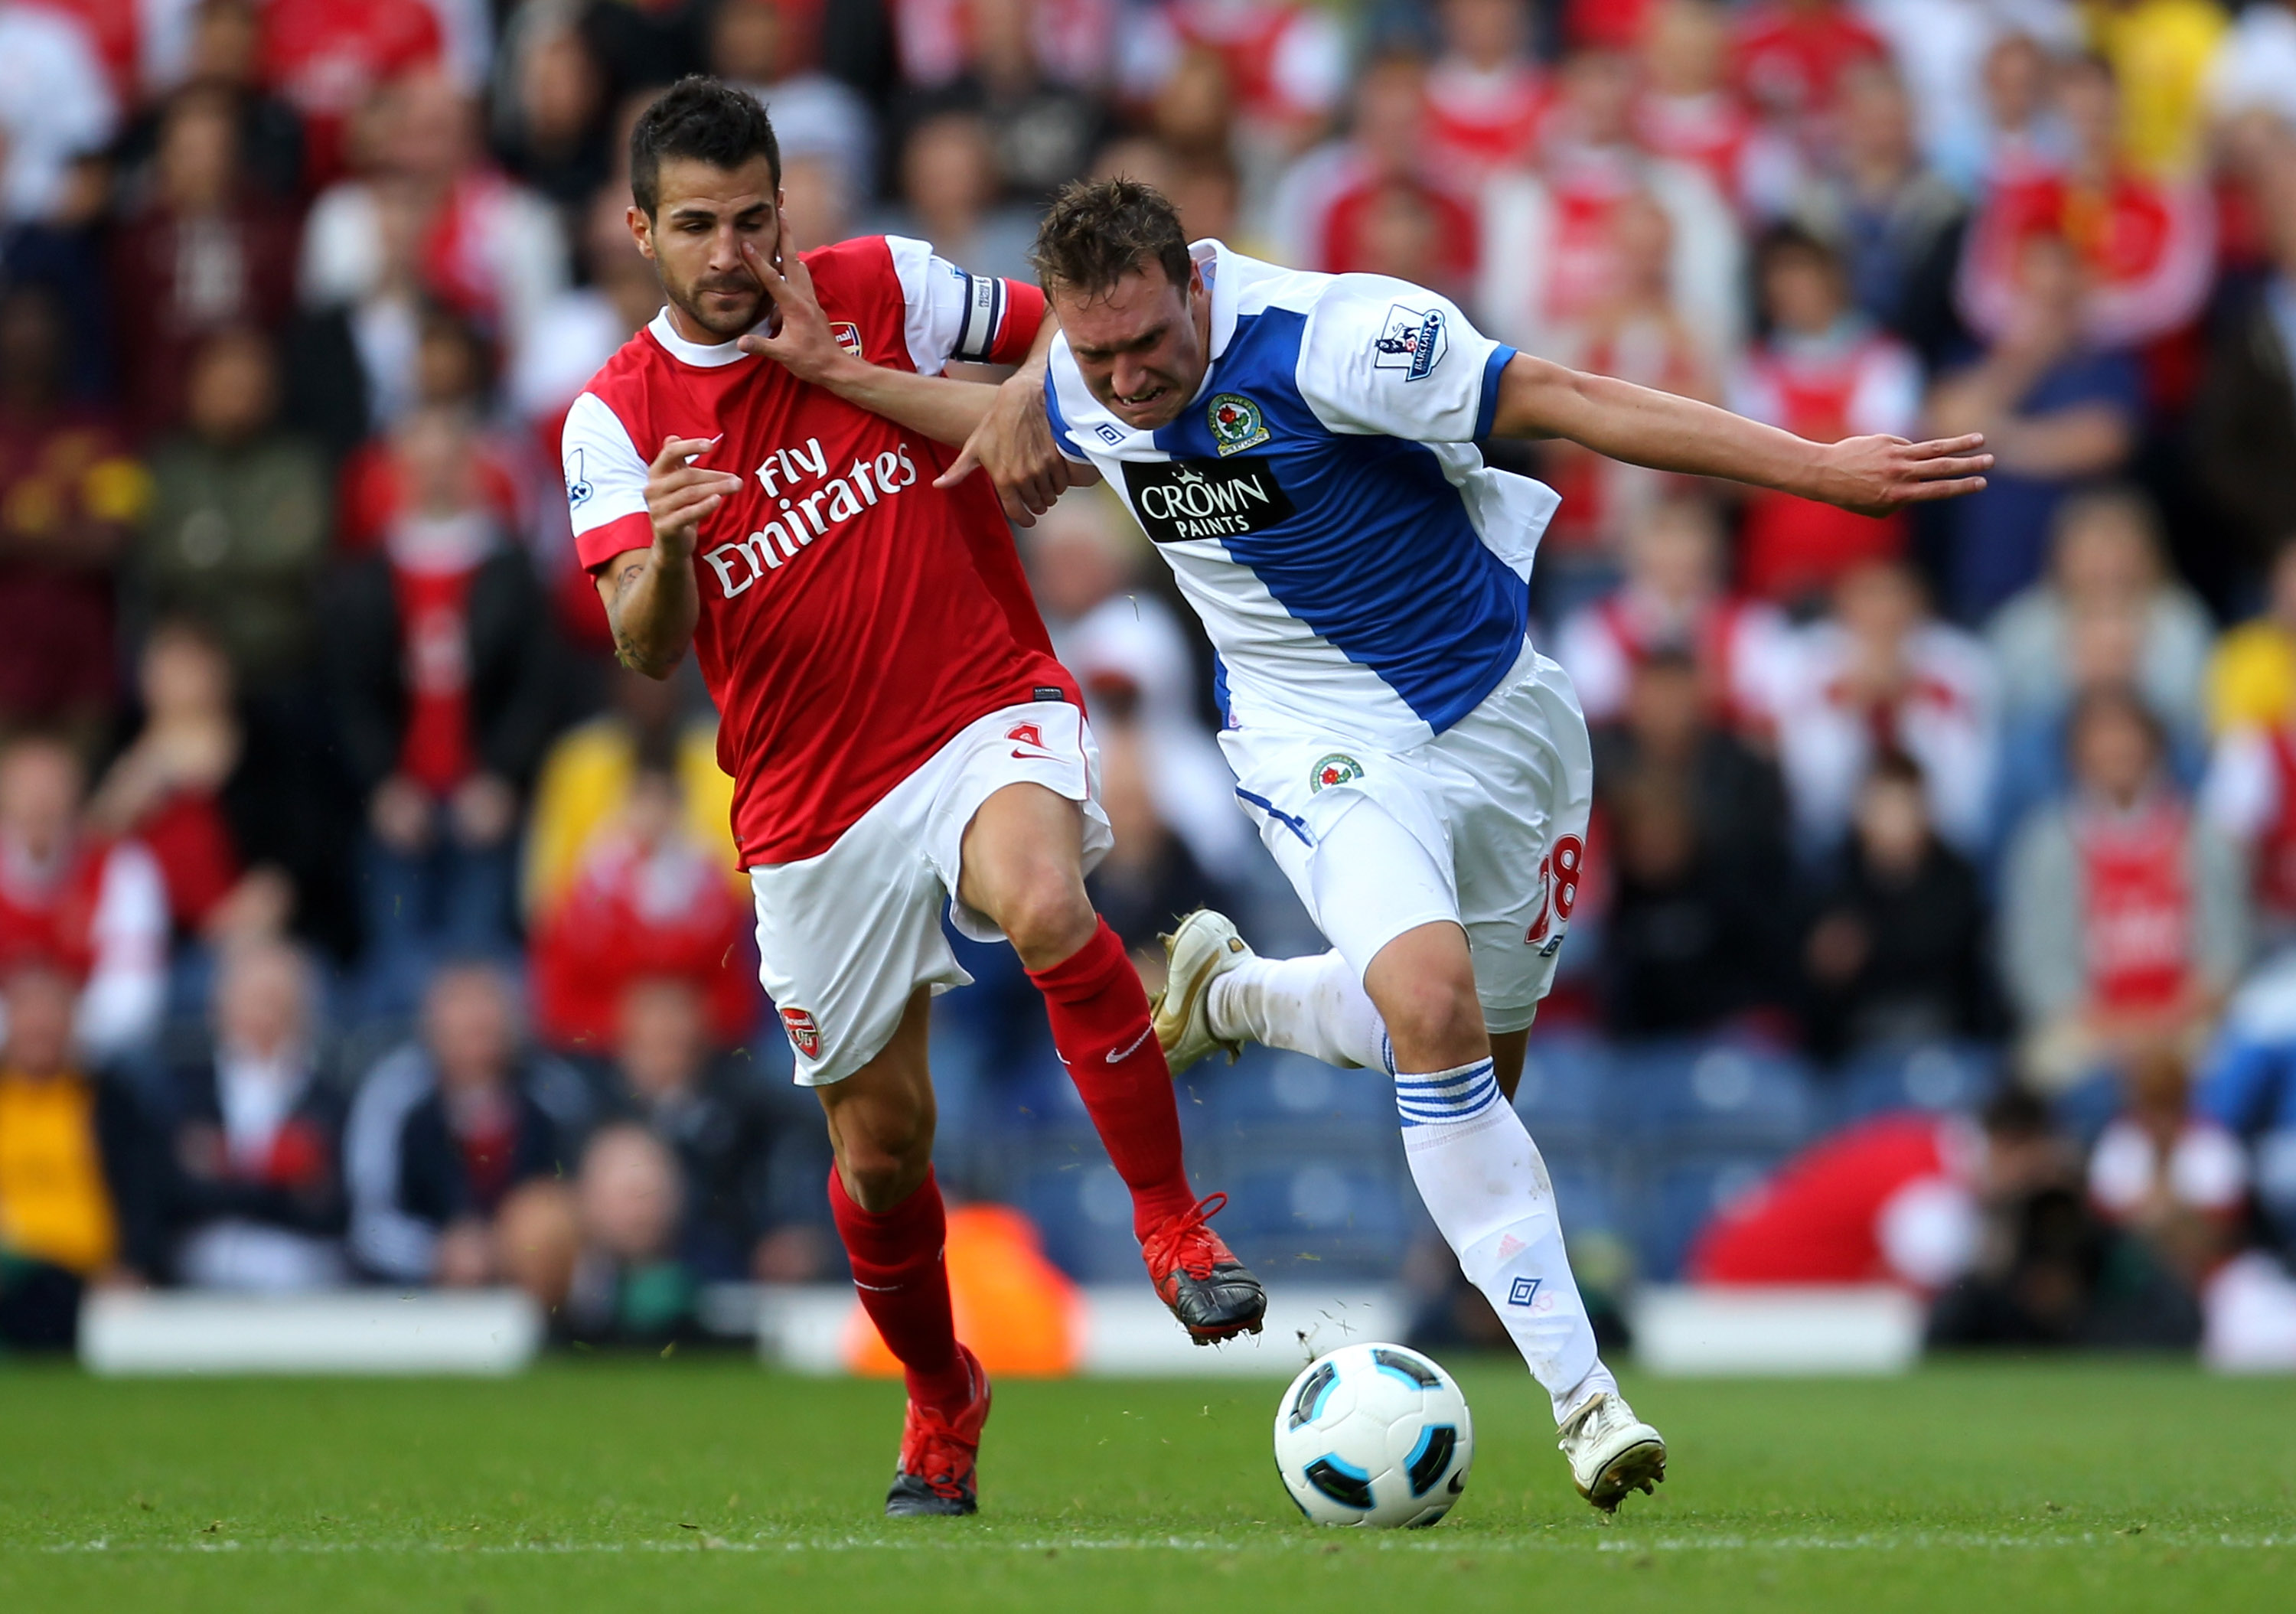 BLACKBURN, ENGLAND - AUGUST 28:  Phil Jones of Blackburn Rovers battles for the ball with Cesc Fabregas of Arsenal during the Barclays Premier League match between Blackburn Rovers and Arsenal at Ewood Park on August 28, 2010 in Blackburn, England.  (Phot